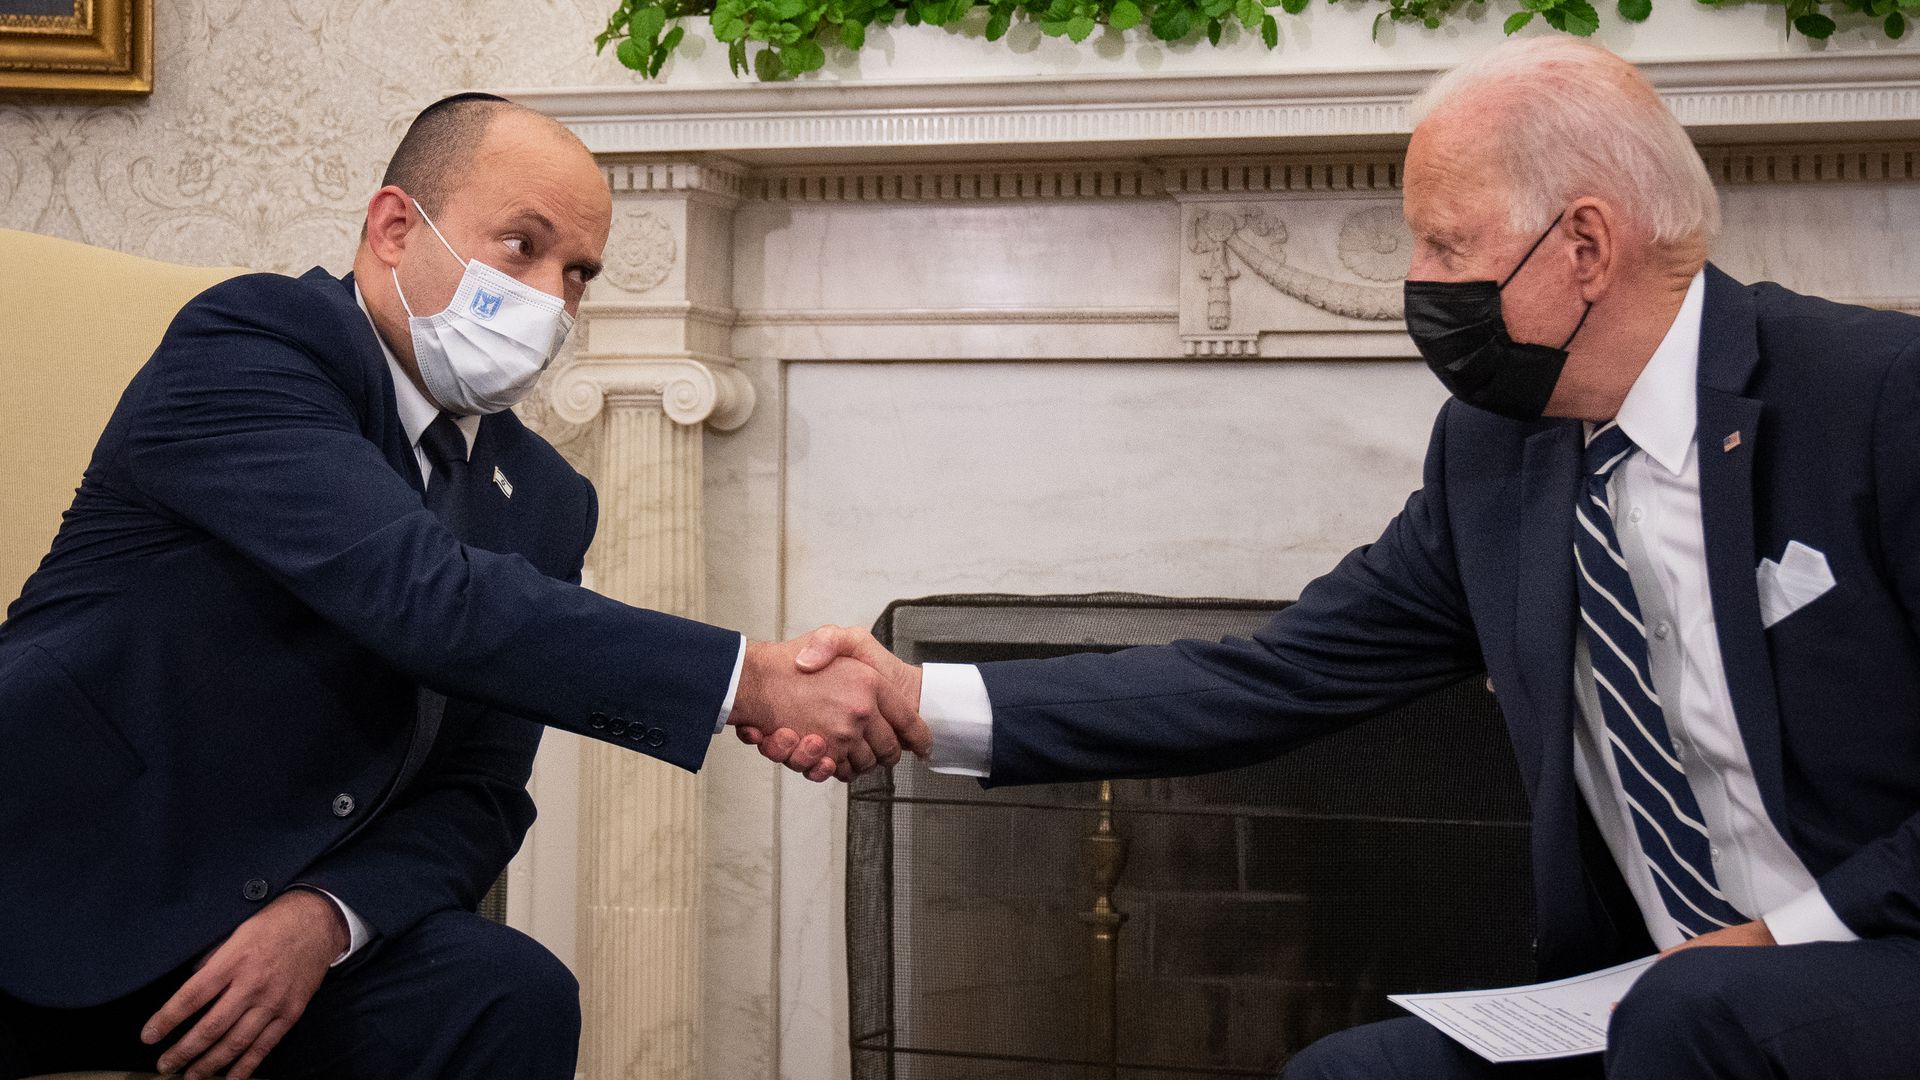 Biden meets with Bennett in the Oval Office on Aug. 27, 2021. Photo: Sarahbeth Maney/Pool/Getty Images